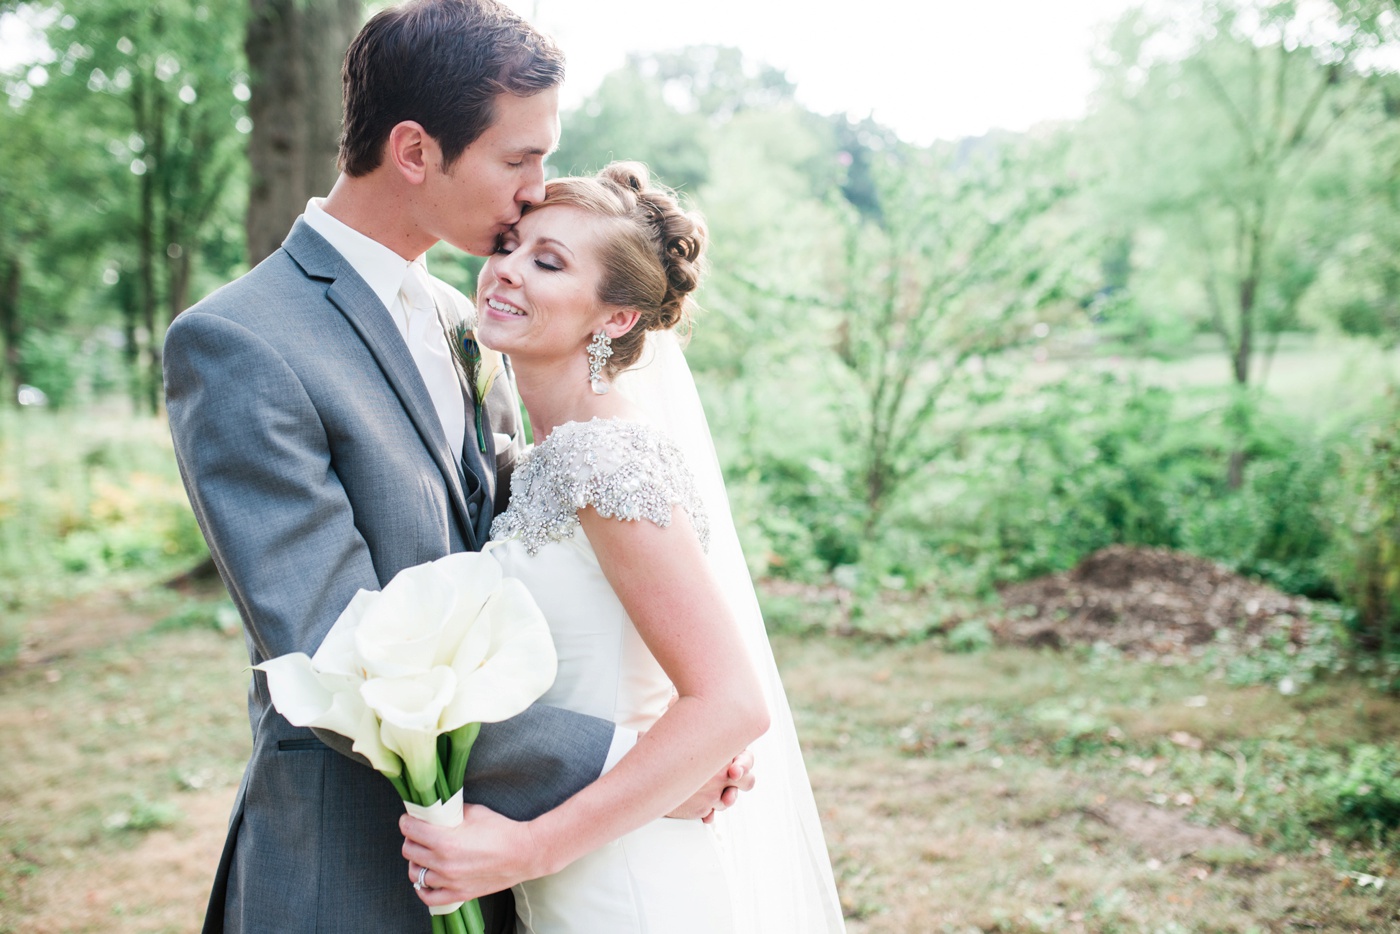 Goffle Brook Park - Paterson New Jersey Wedding Photographer - Alison Dunn Photography